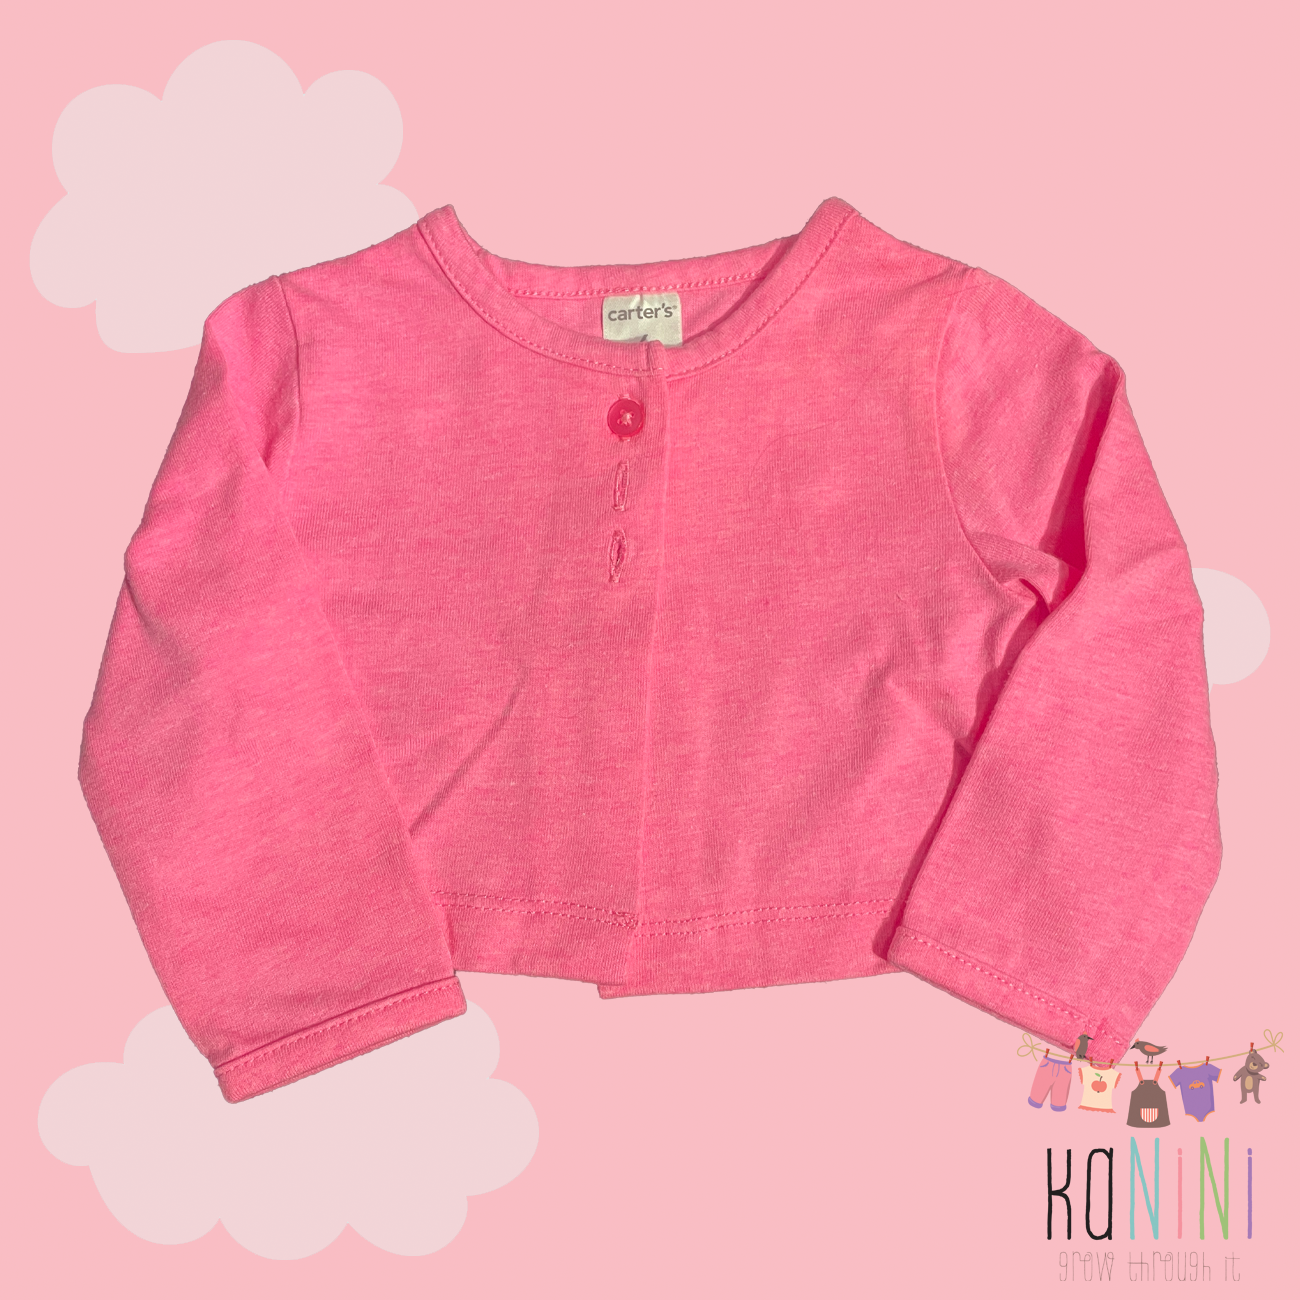 Featured image for “Carter's 6 Months Girls Pink Cardigan”